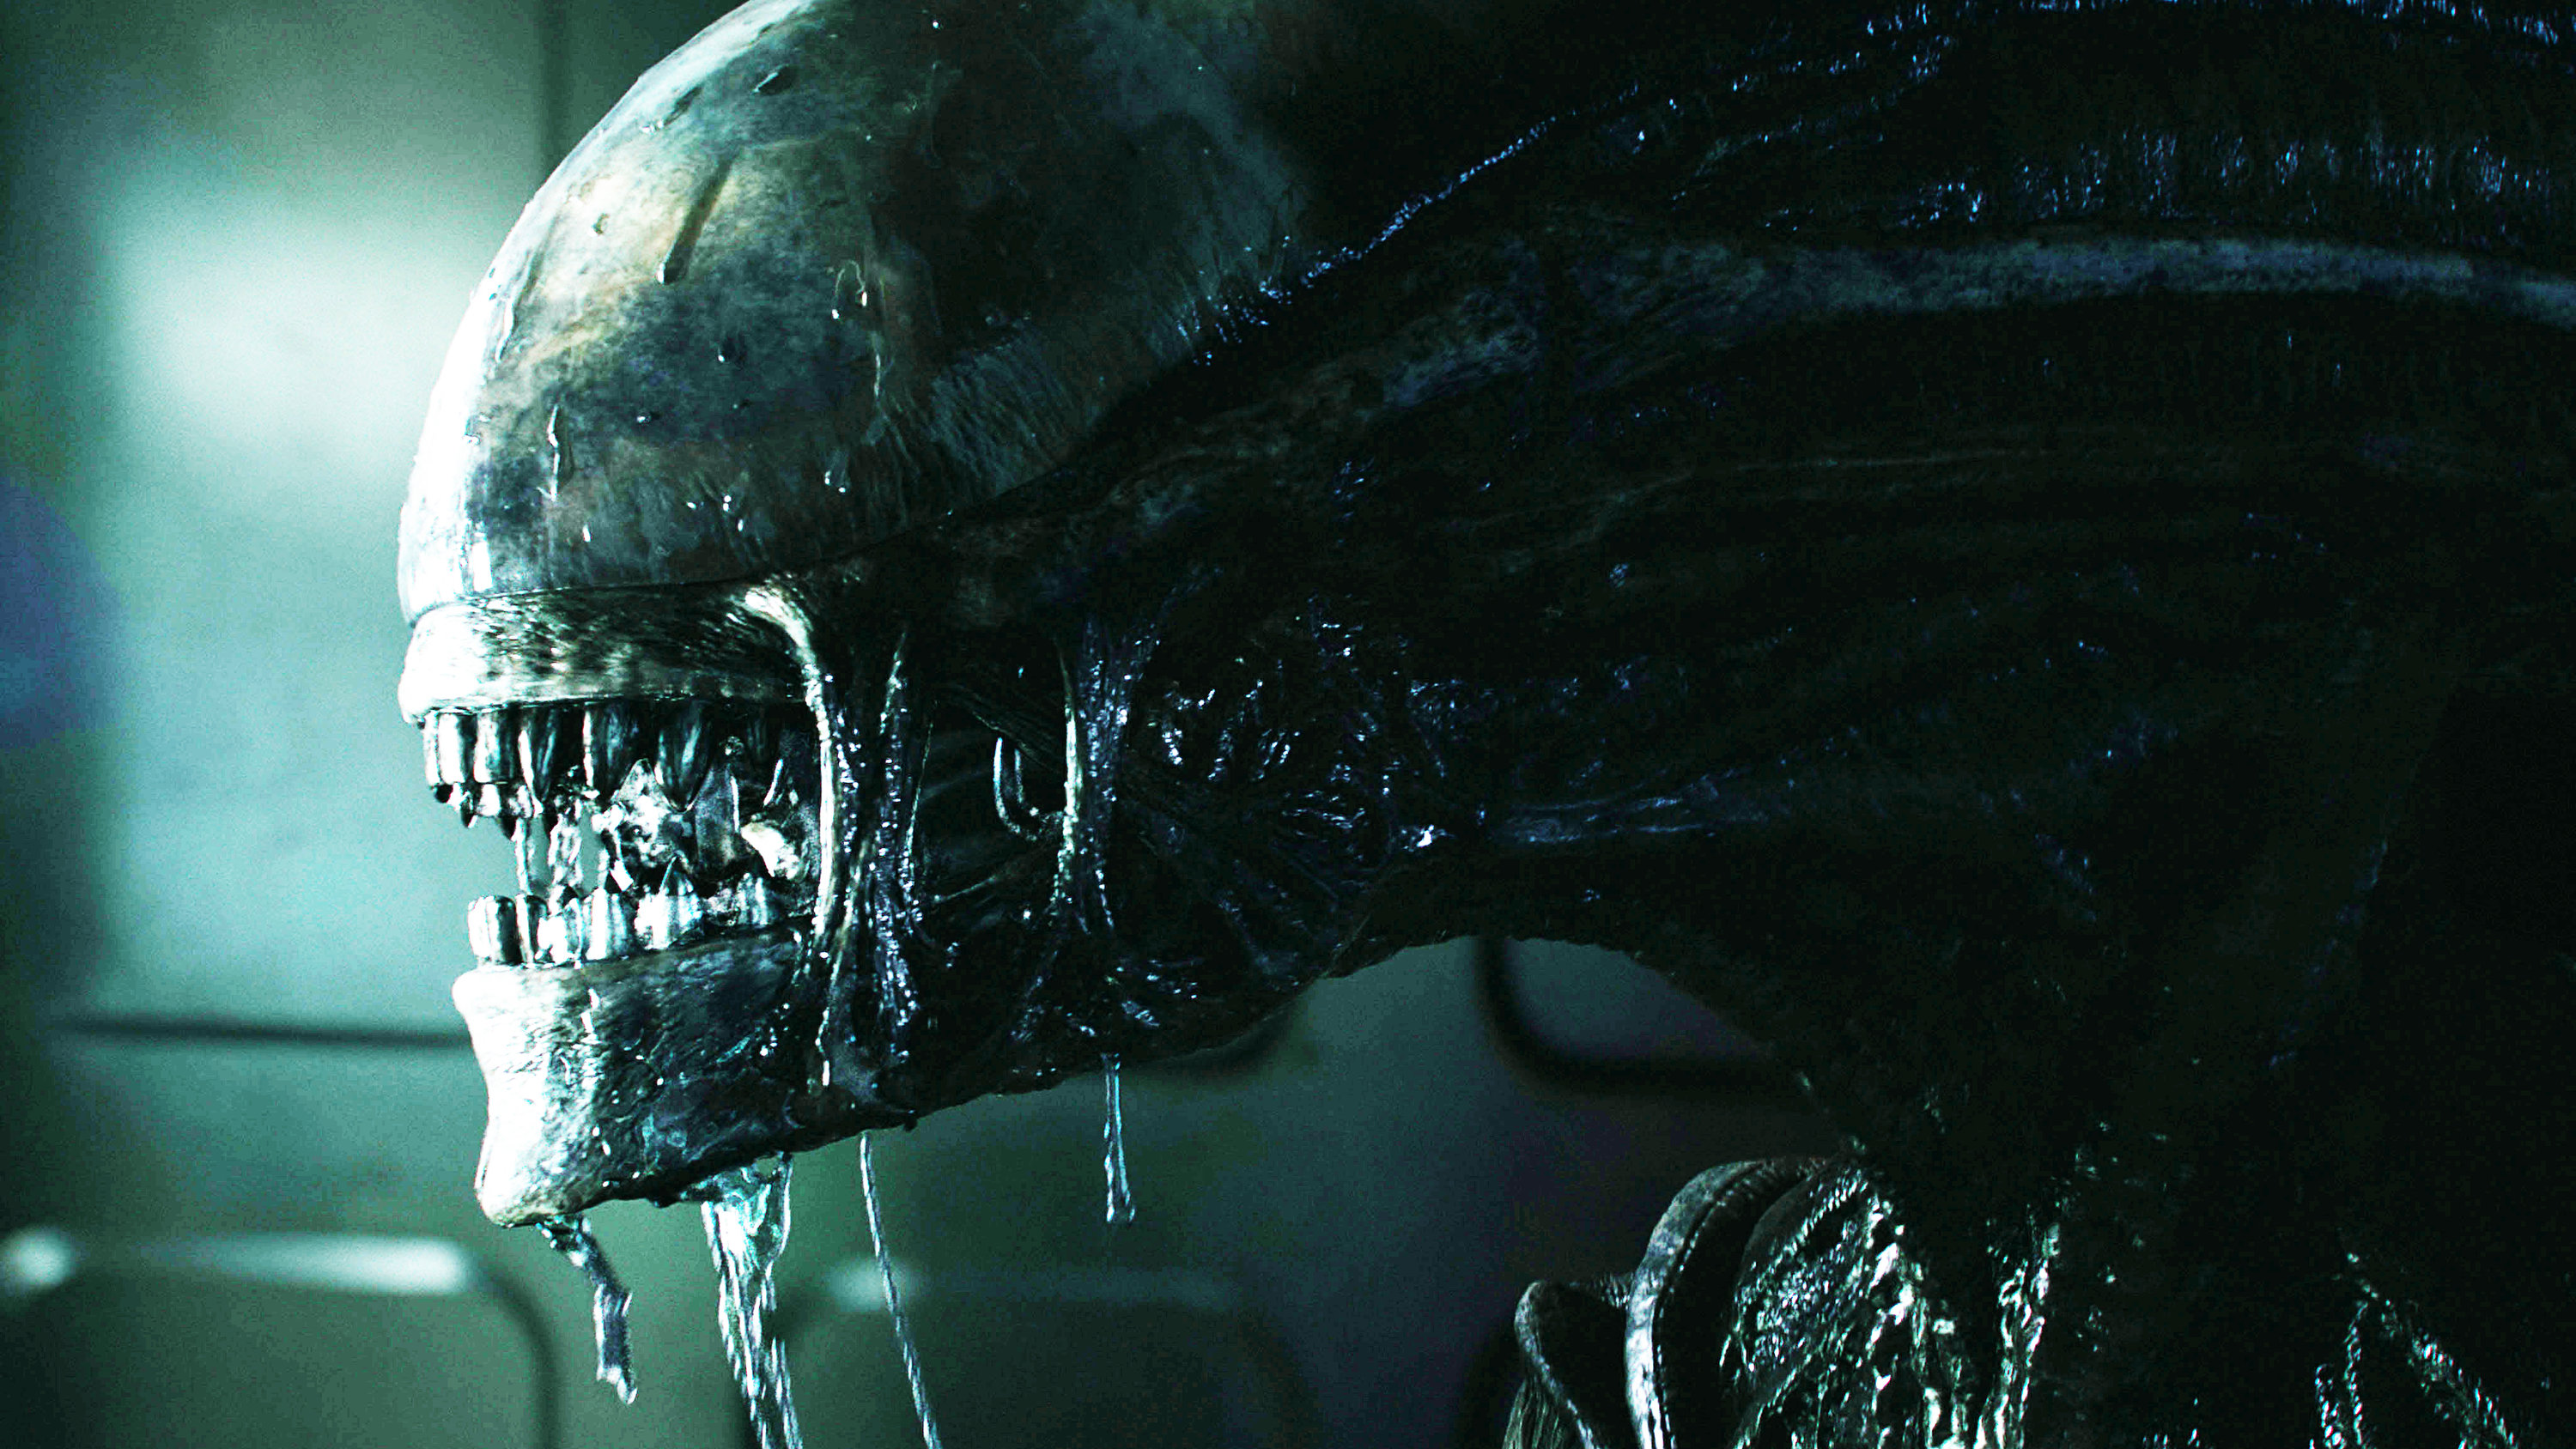 How 'Alien' Spawned So Many Others